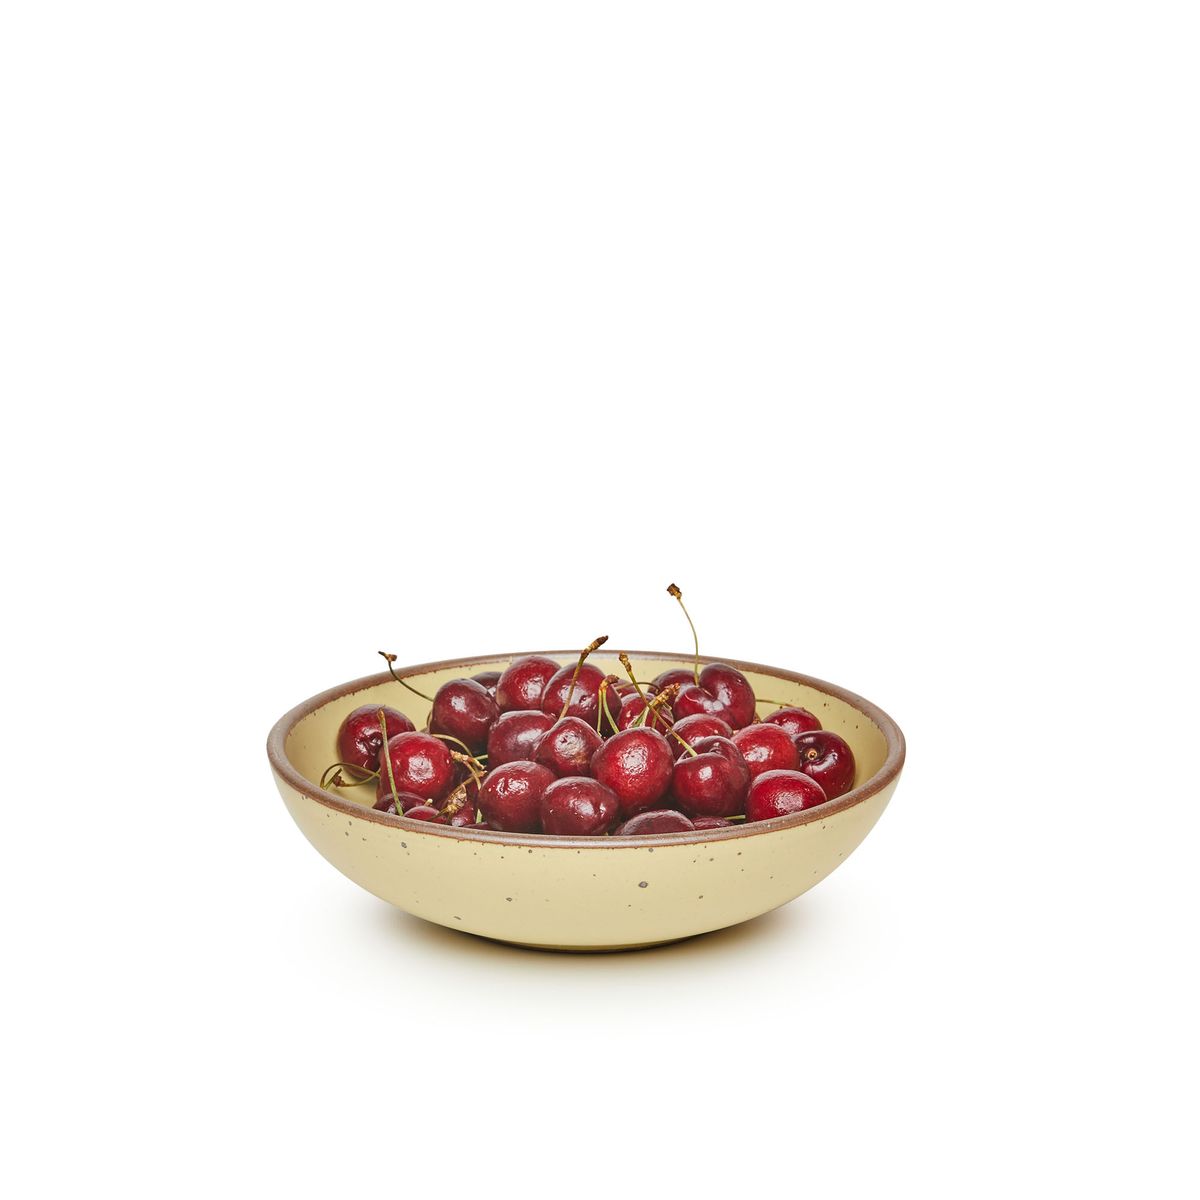 A dinner-sized shallow ceramic bowl in a light butter yellow color featuring iron speckles and an unglazed rim, filled with cherries